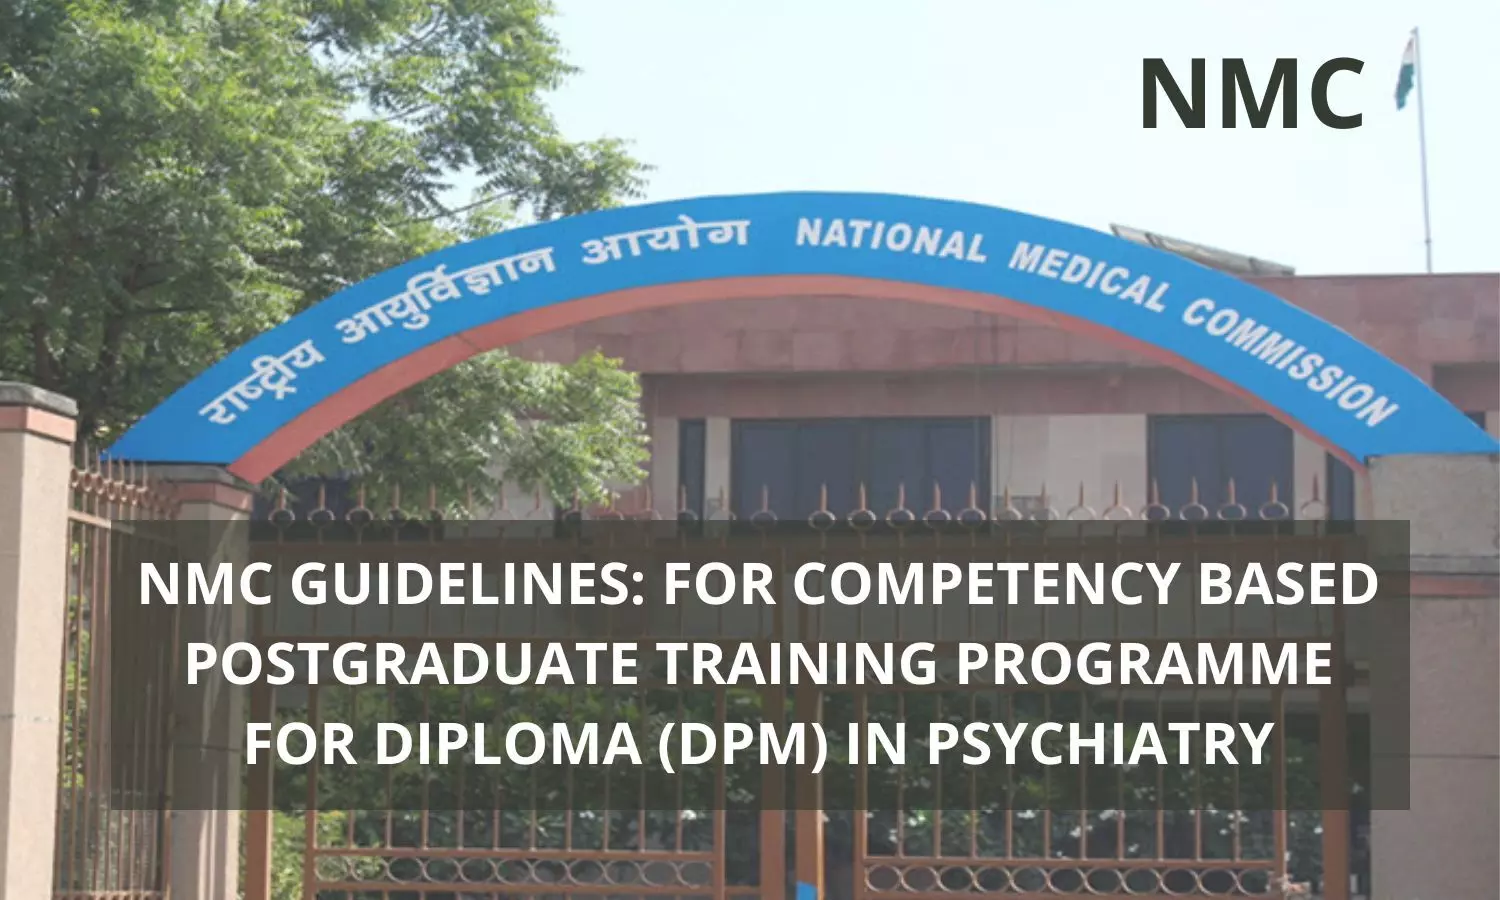 NMC Guidelines For Competency-Based Training Programme For PG Diploma In Psychiatry (DPM)